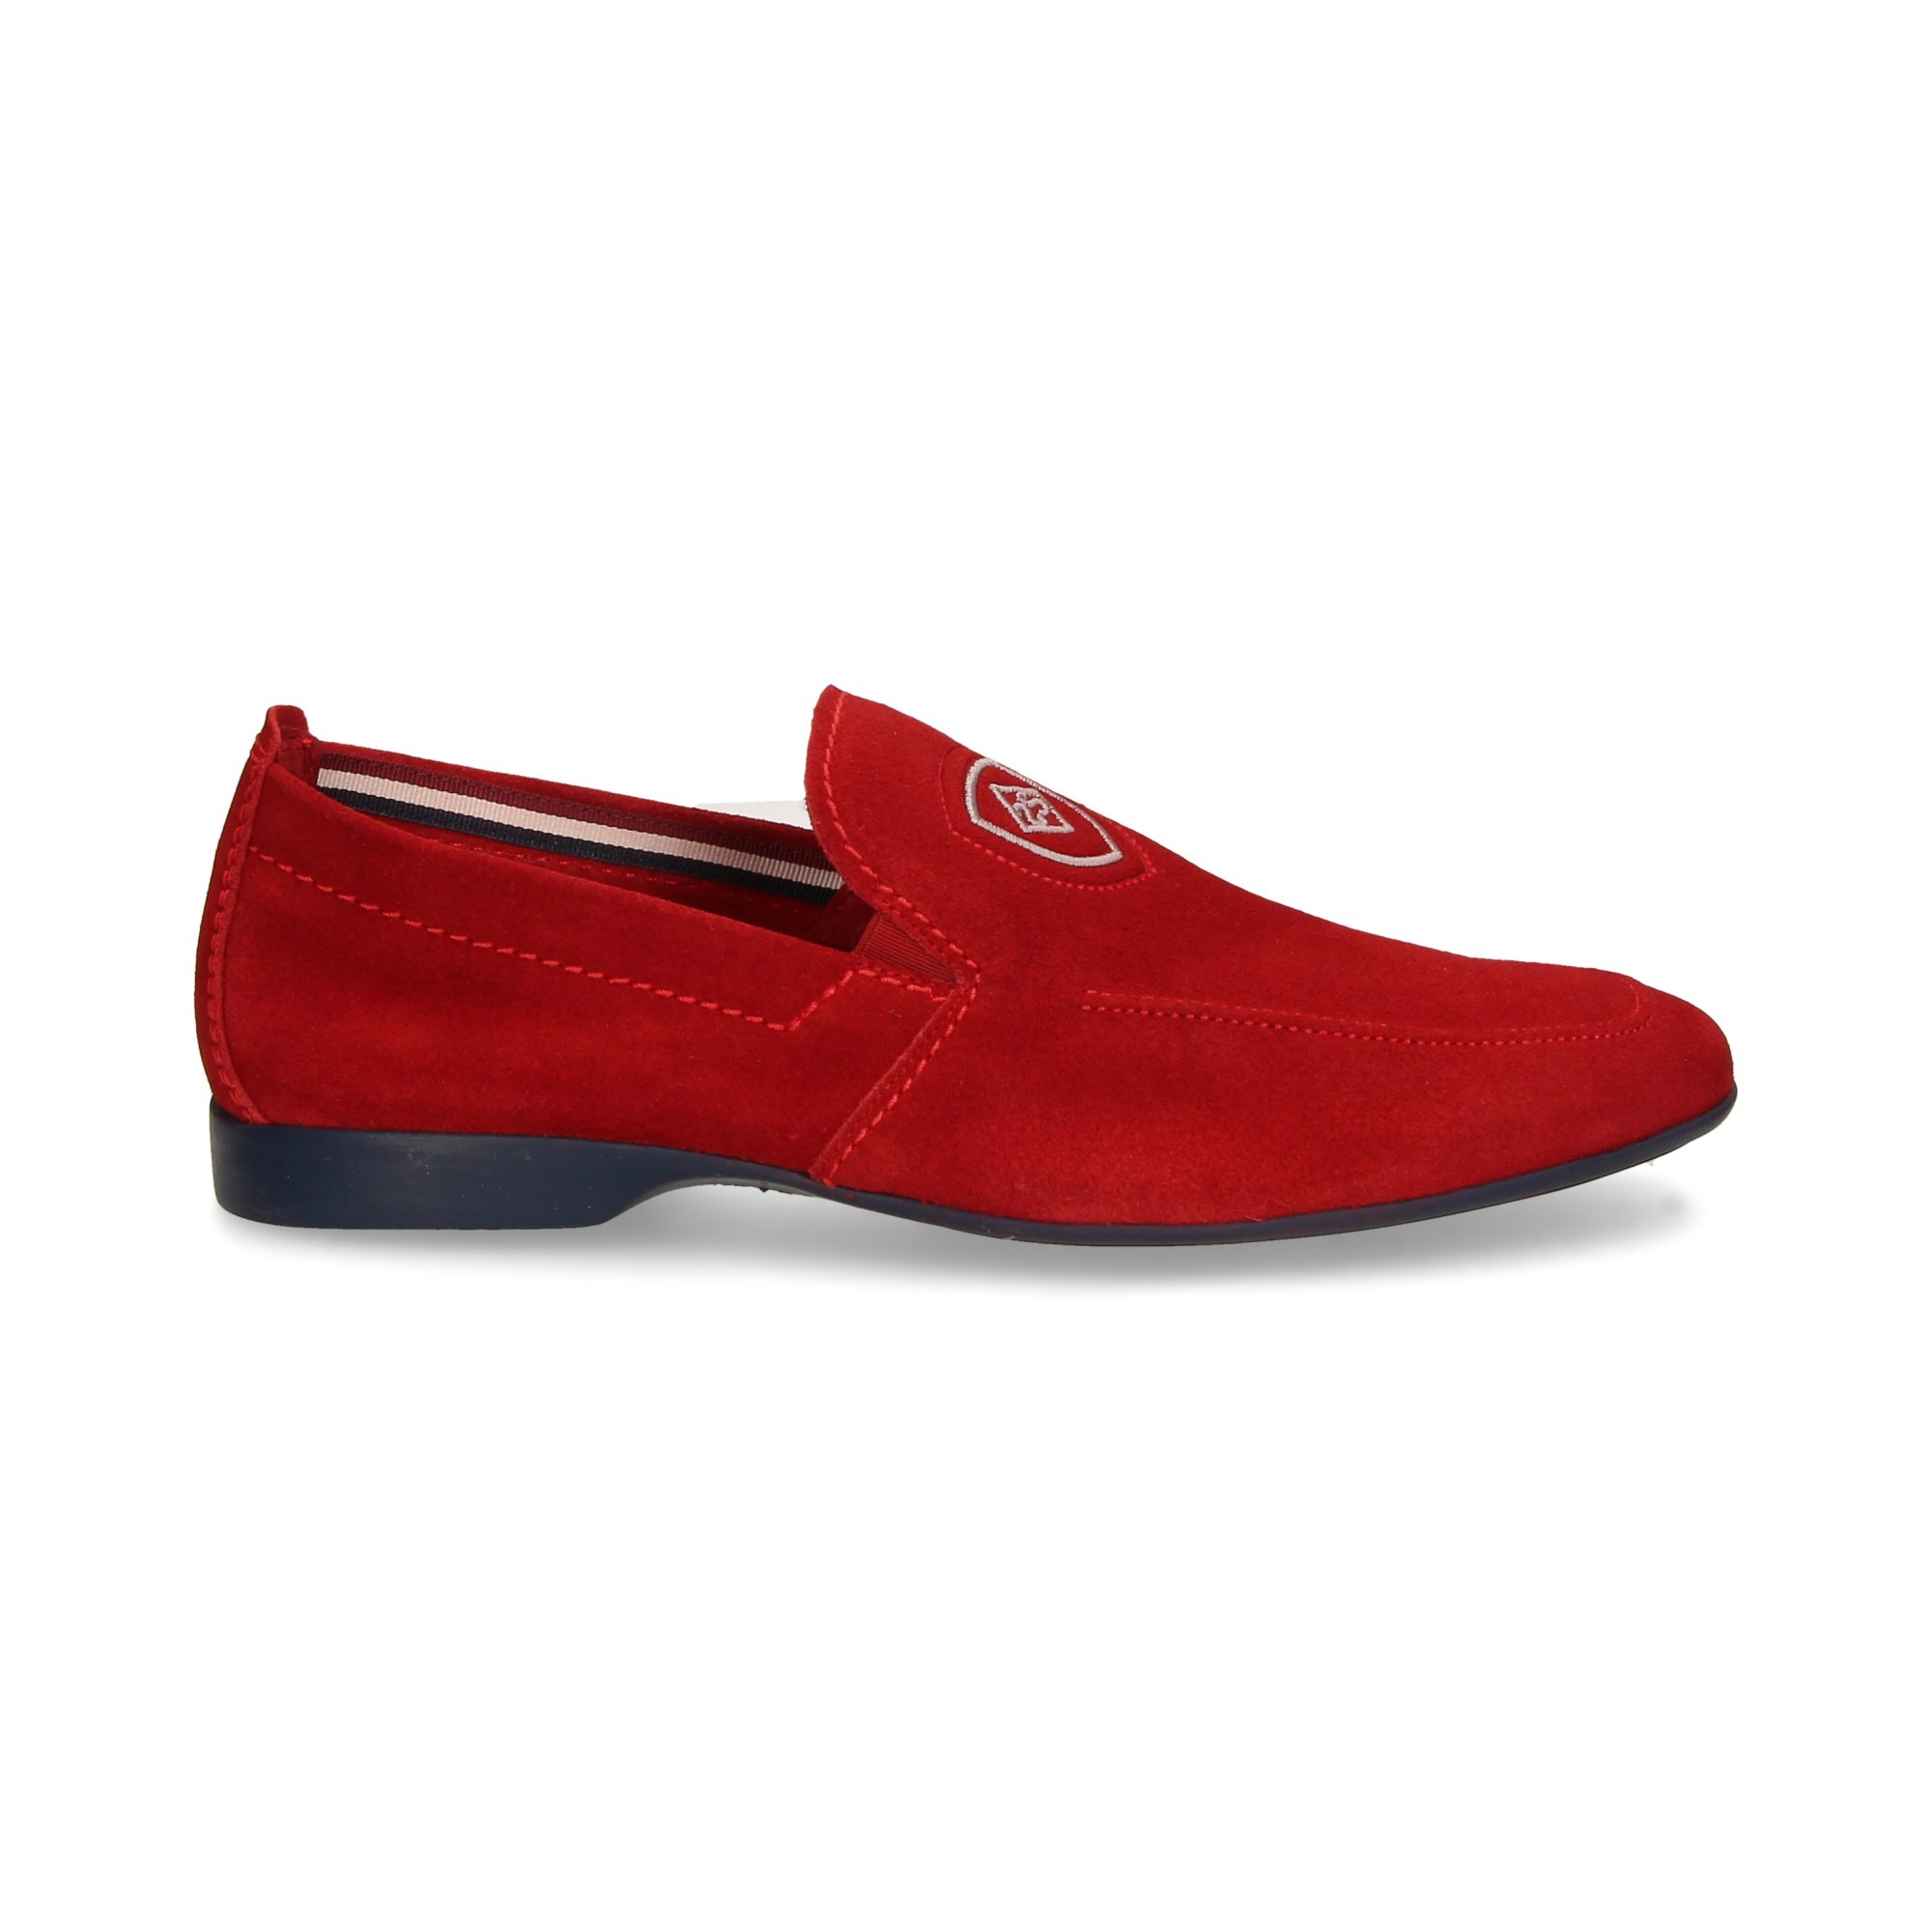 moccasin-shield-red-suede